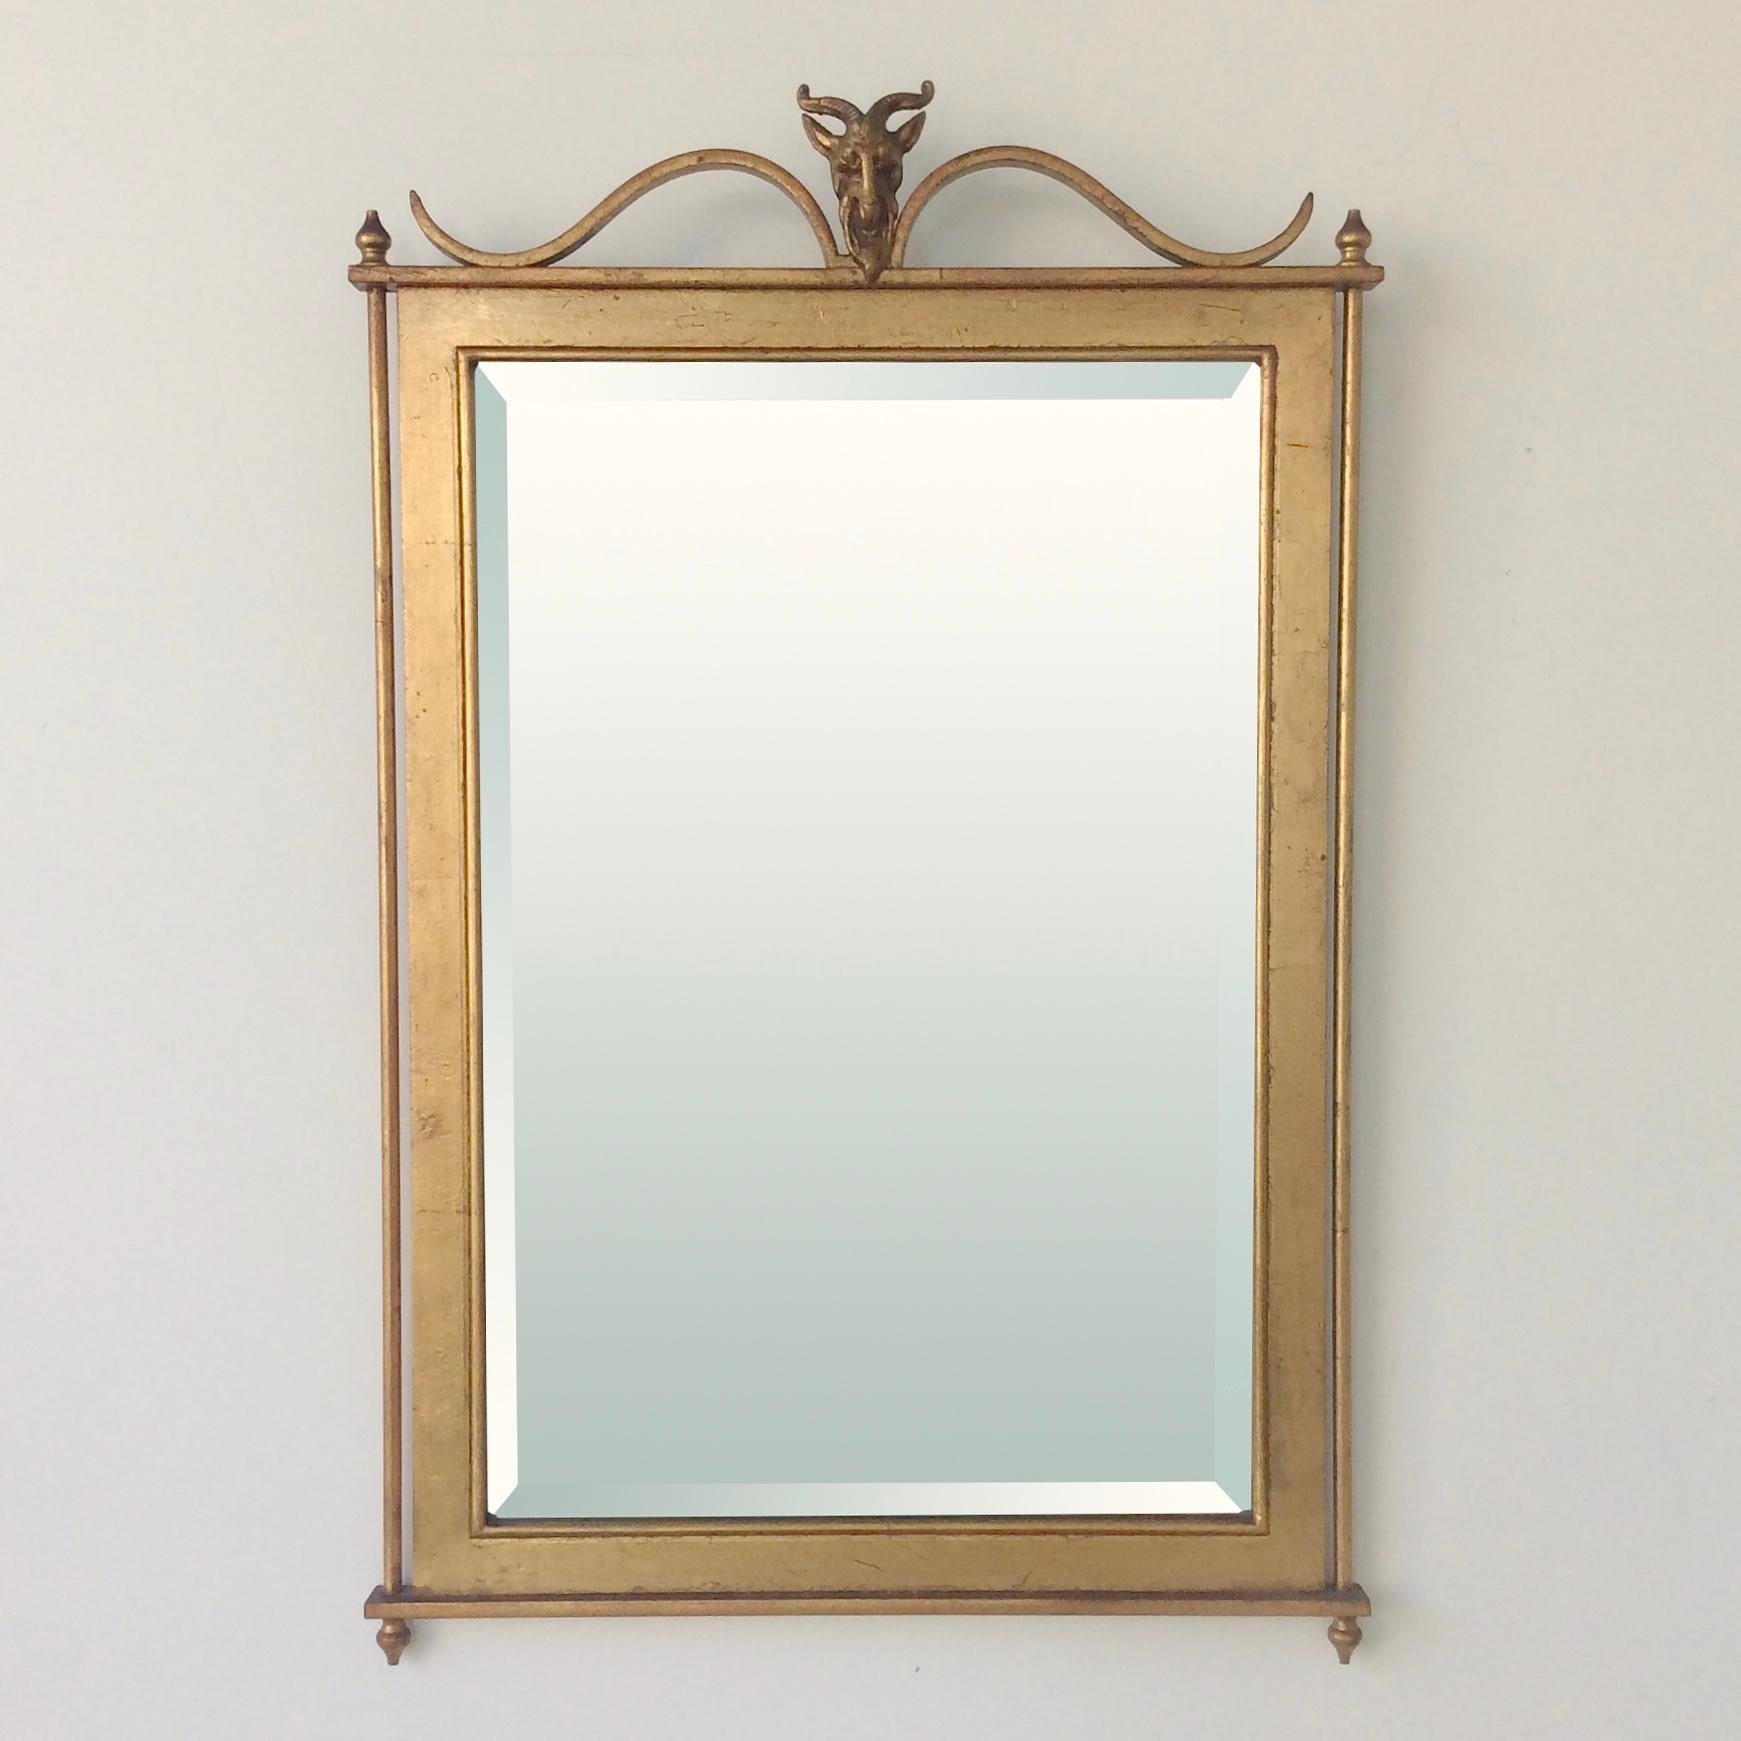 Nice gilt metal wall mirror, circa 1940, France.
Gilt metal frame with decorative goat head, beveled mirror.
Dimensions: 70 cm H, 44 cm W, 6 cm D.
Good original condition.
All purchases are covered by our Buyer Protection Guarantee.
This item can be